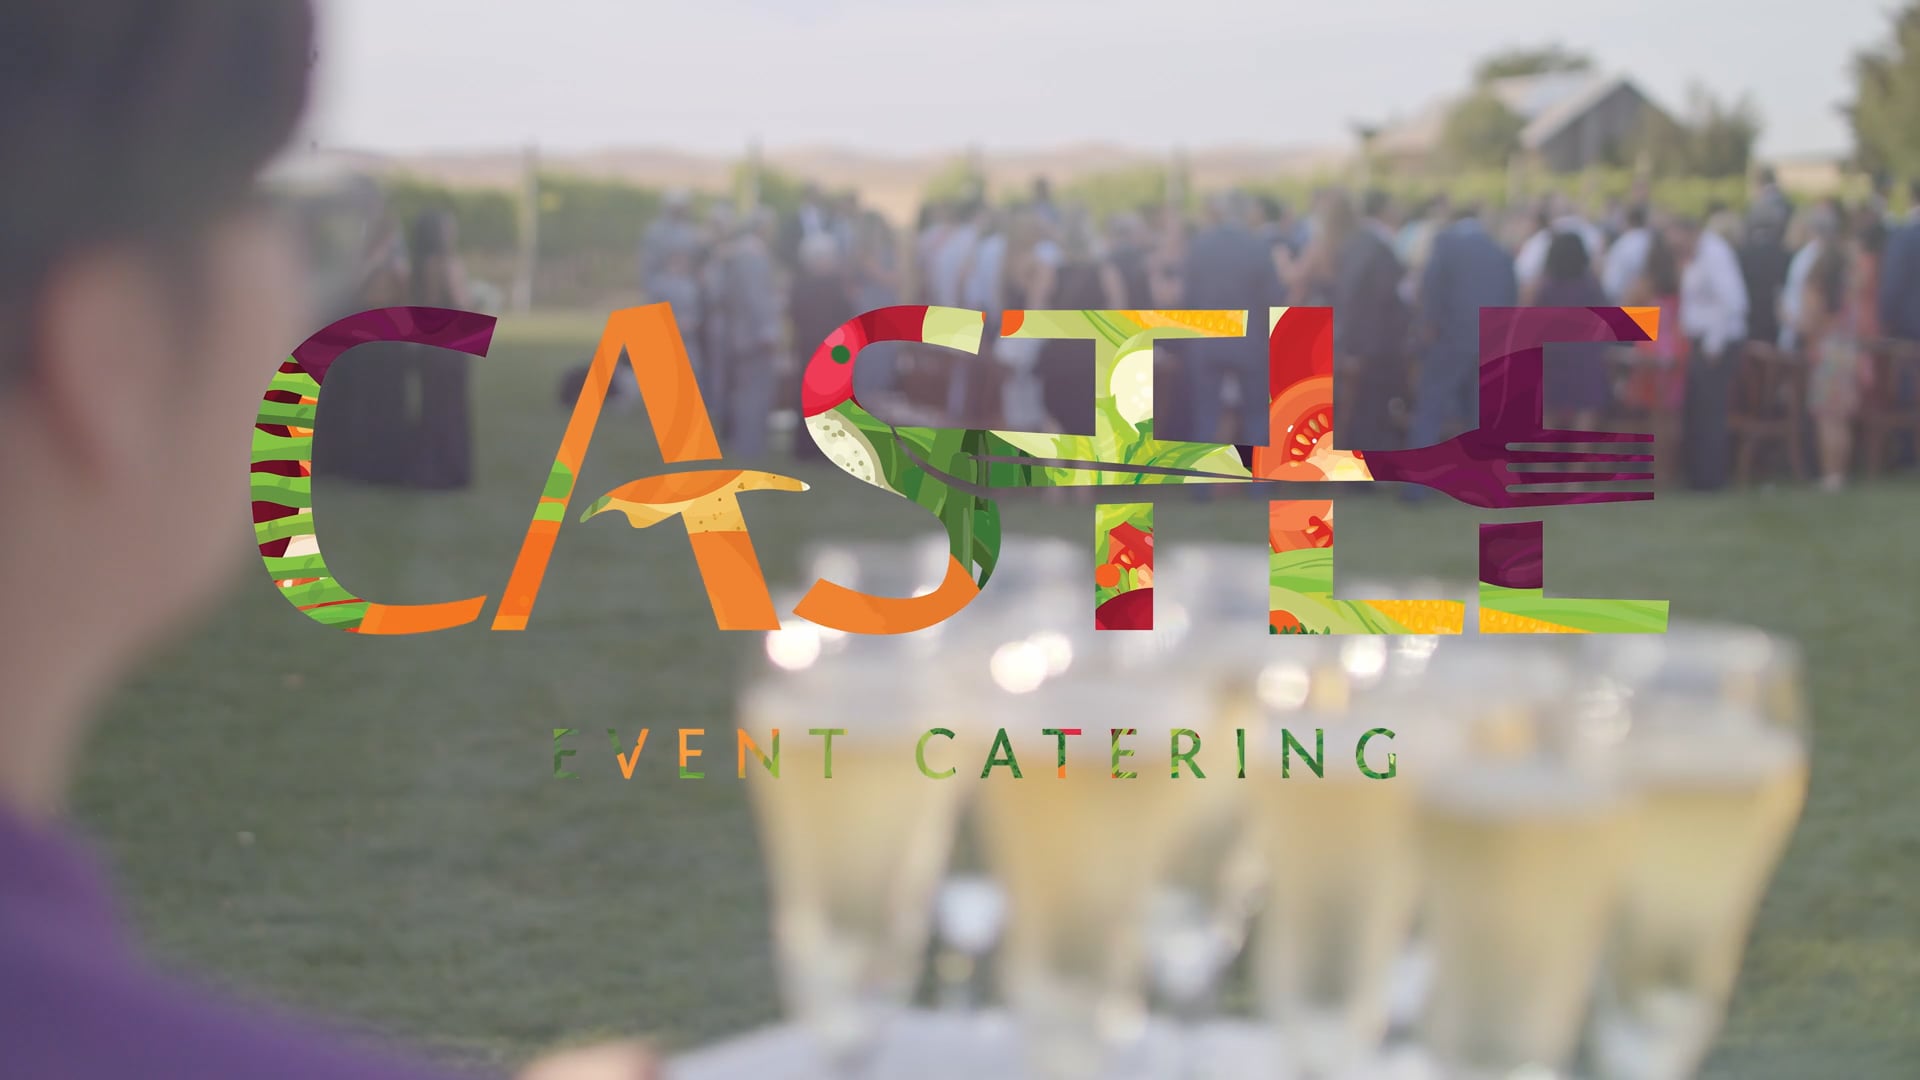 Castle Event Catering